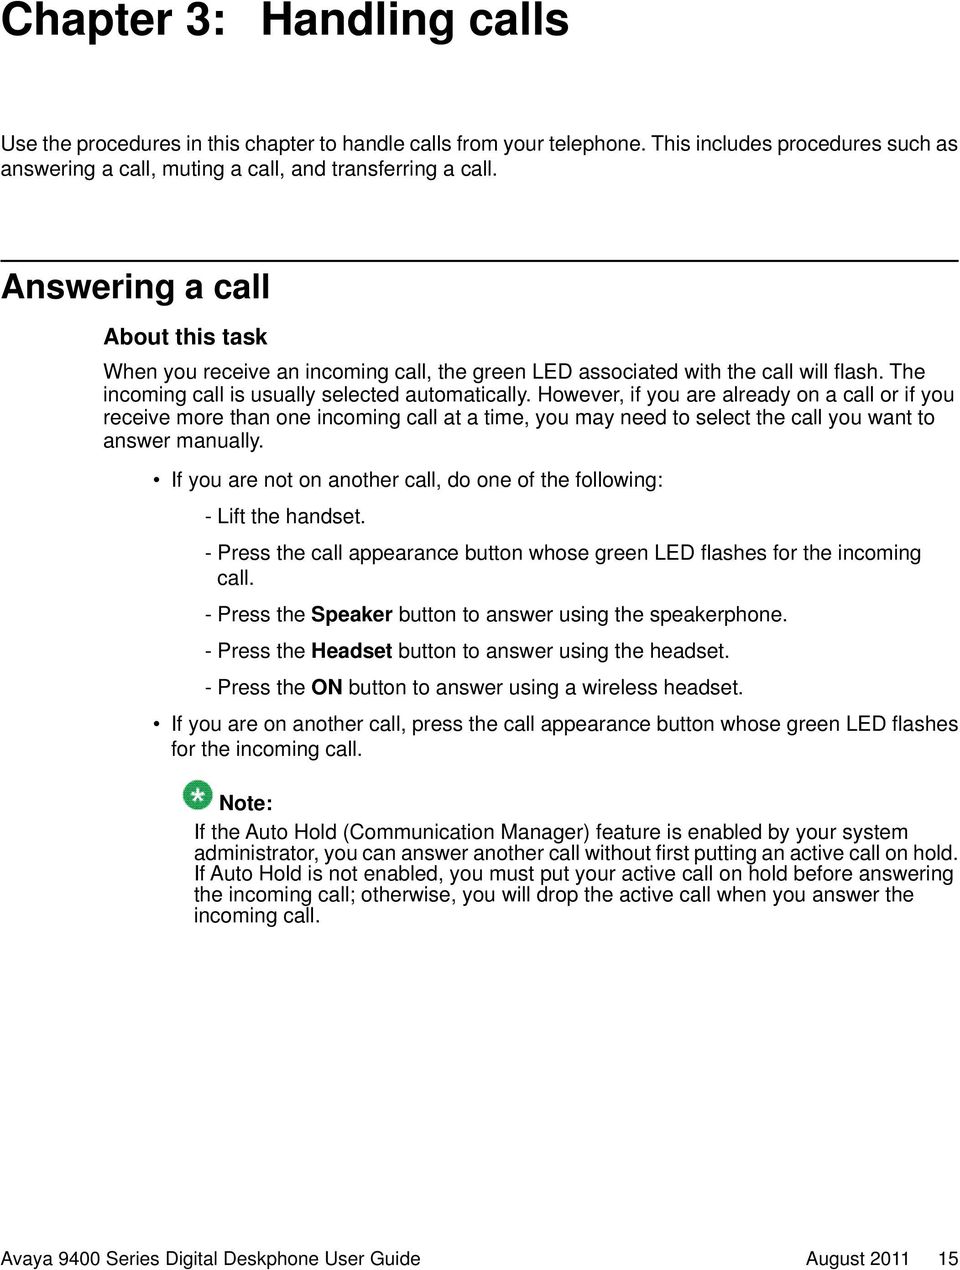 However, if you are already on a call or if you receive more than one incoming call at a time, you may need to select the call you want to answer manually.